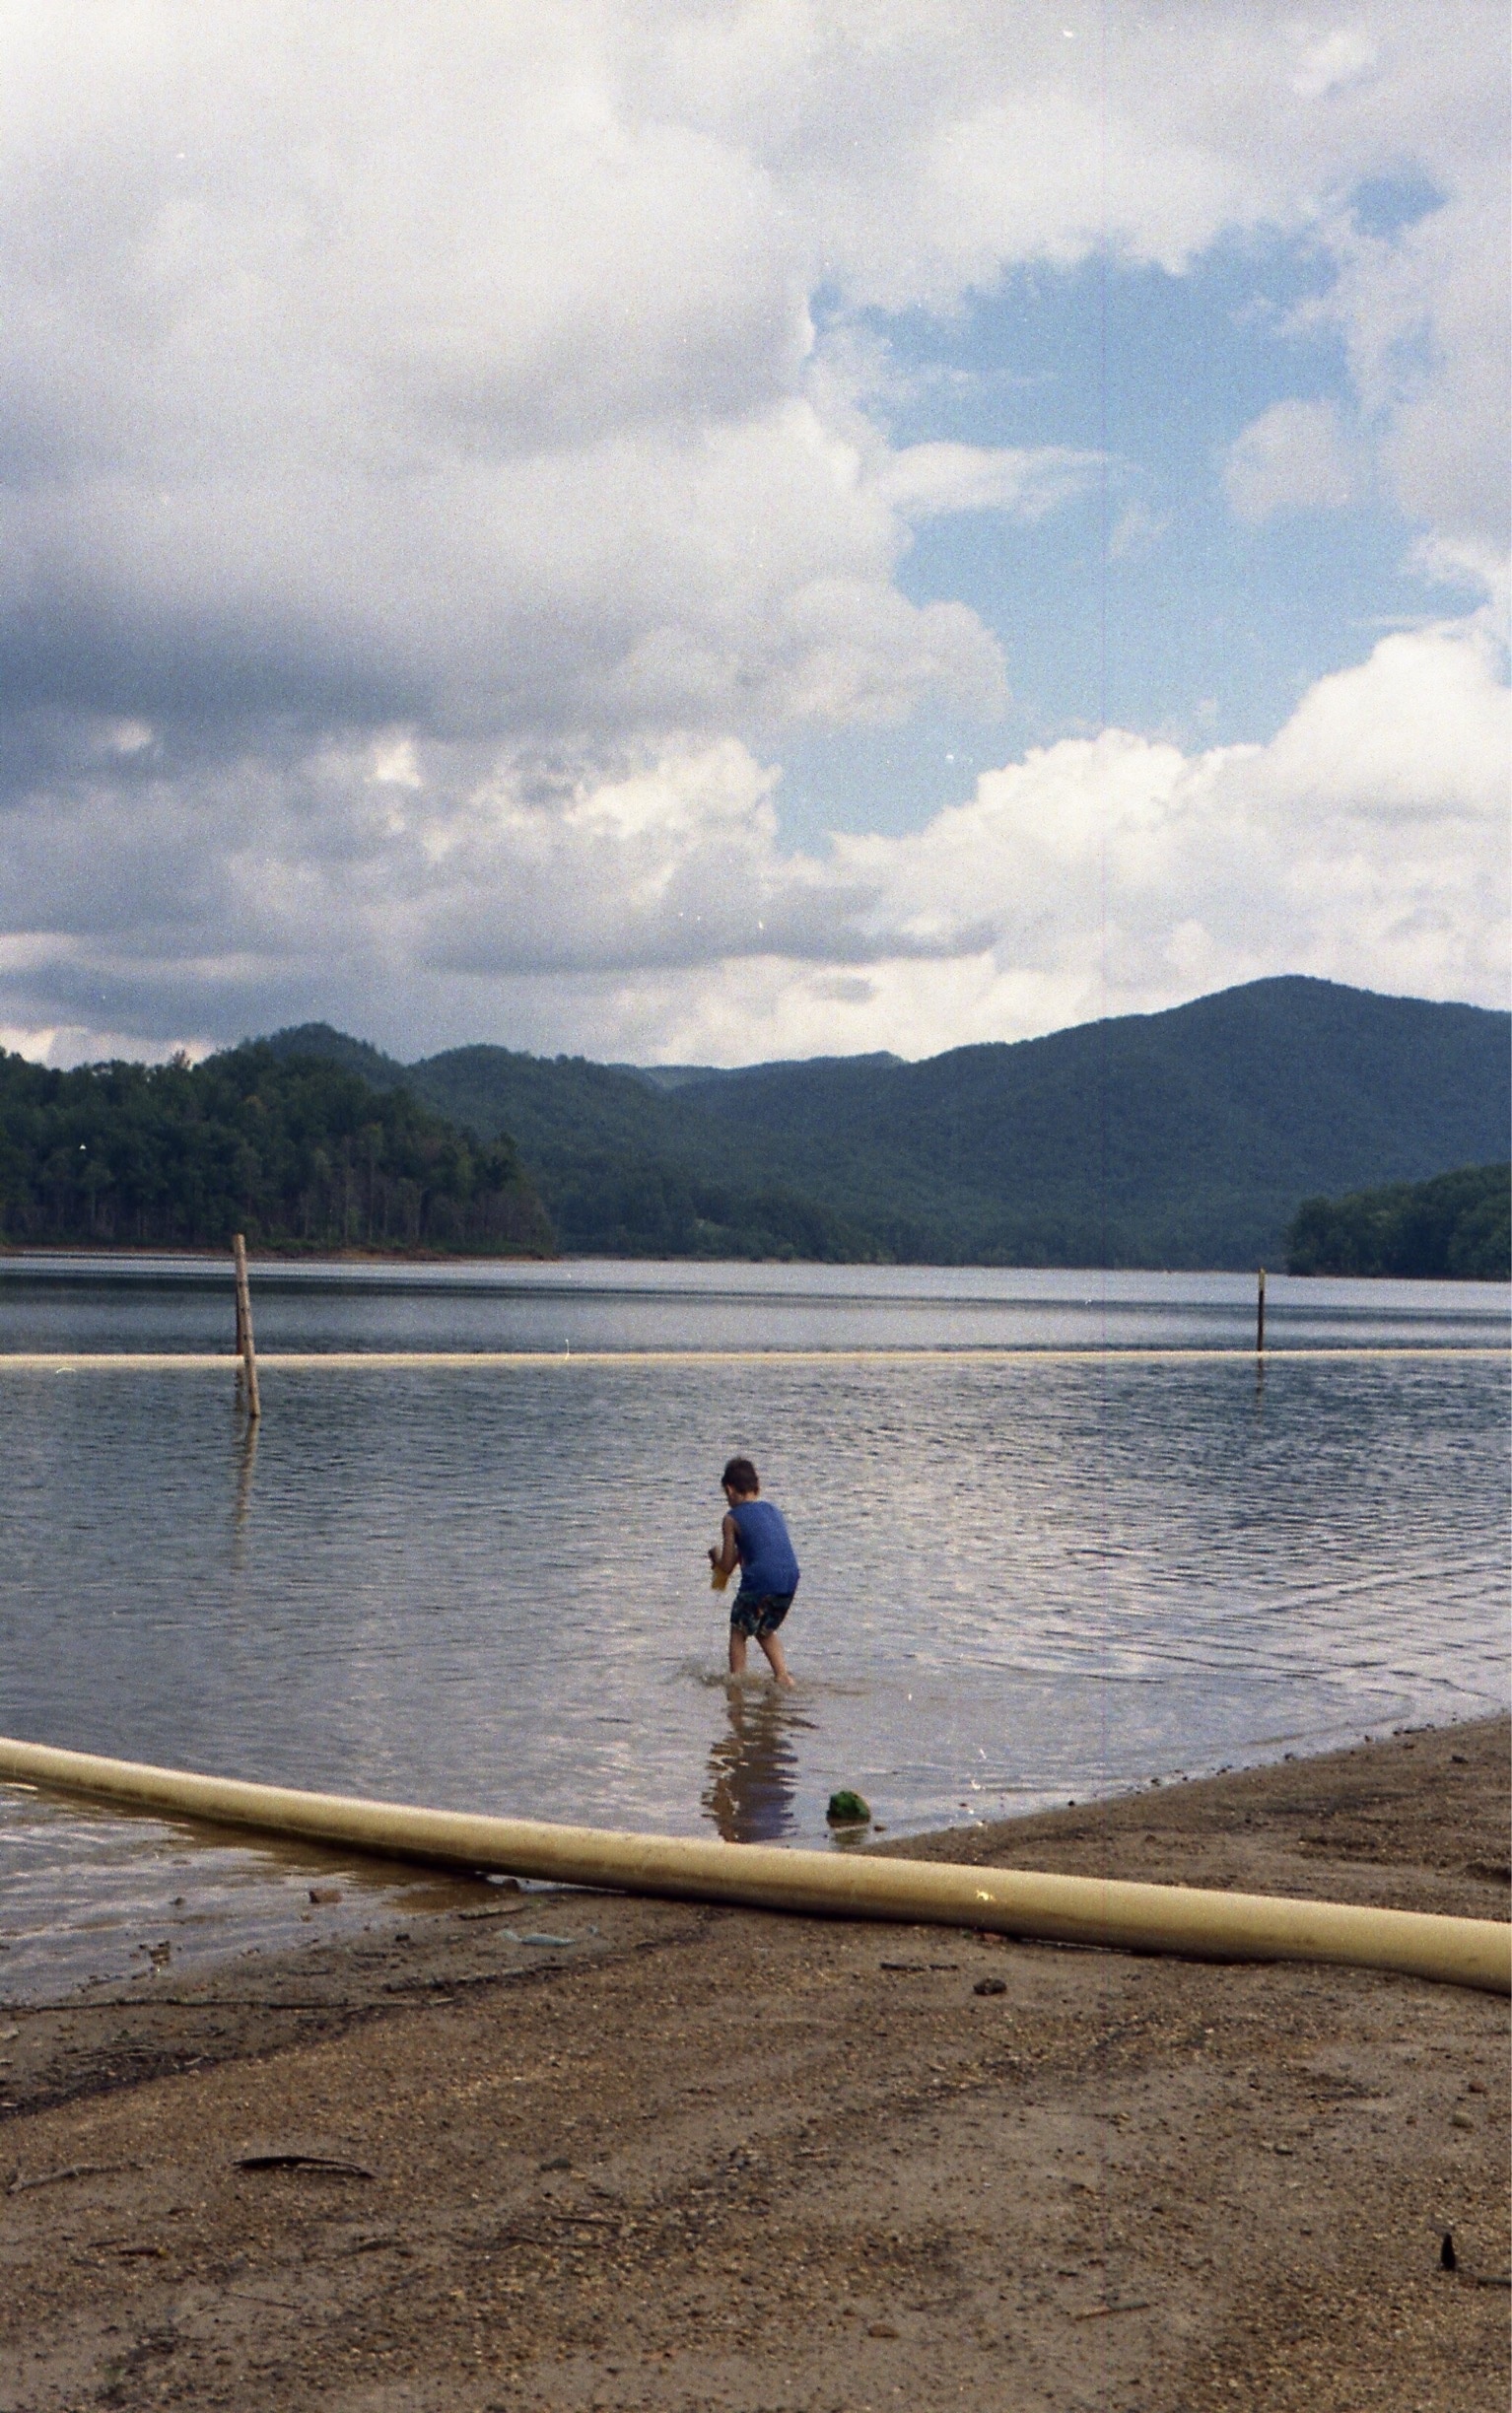 This image was created on a slightly warmer day at a popular swimming area right outside of the North Carolina border and barely inside of Tennessee at Watauga Lake. The child in the image is placed within the yellow pipe border that is placed on the beach for people who decide to go swimming to have a sense of boundary on depth of the water and something to rest on if they get tired while in the water. #appalachianechoes